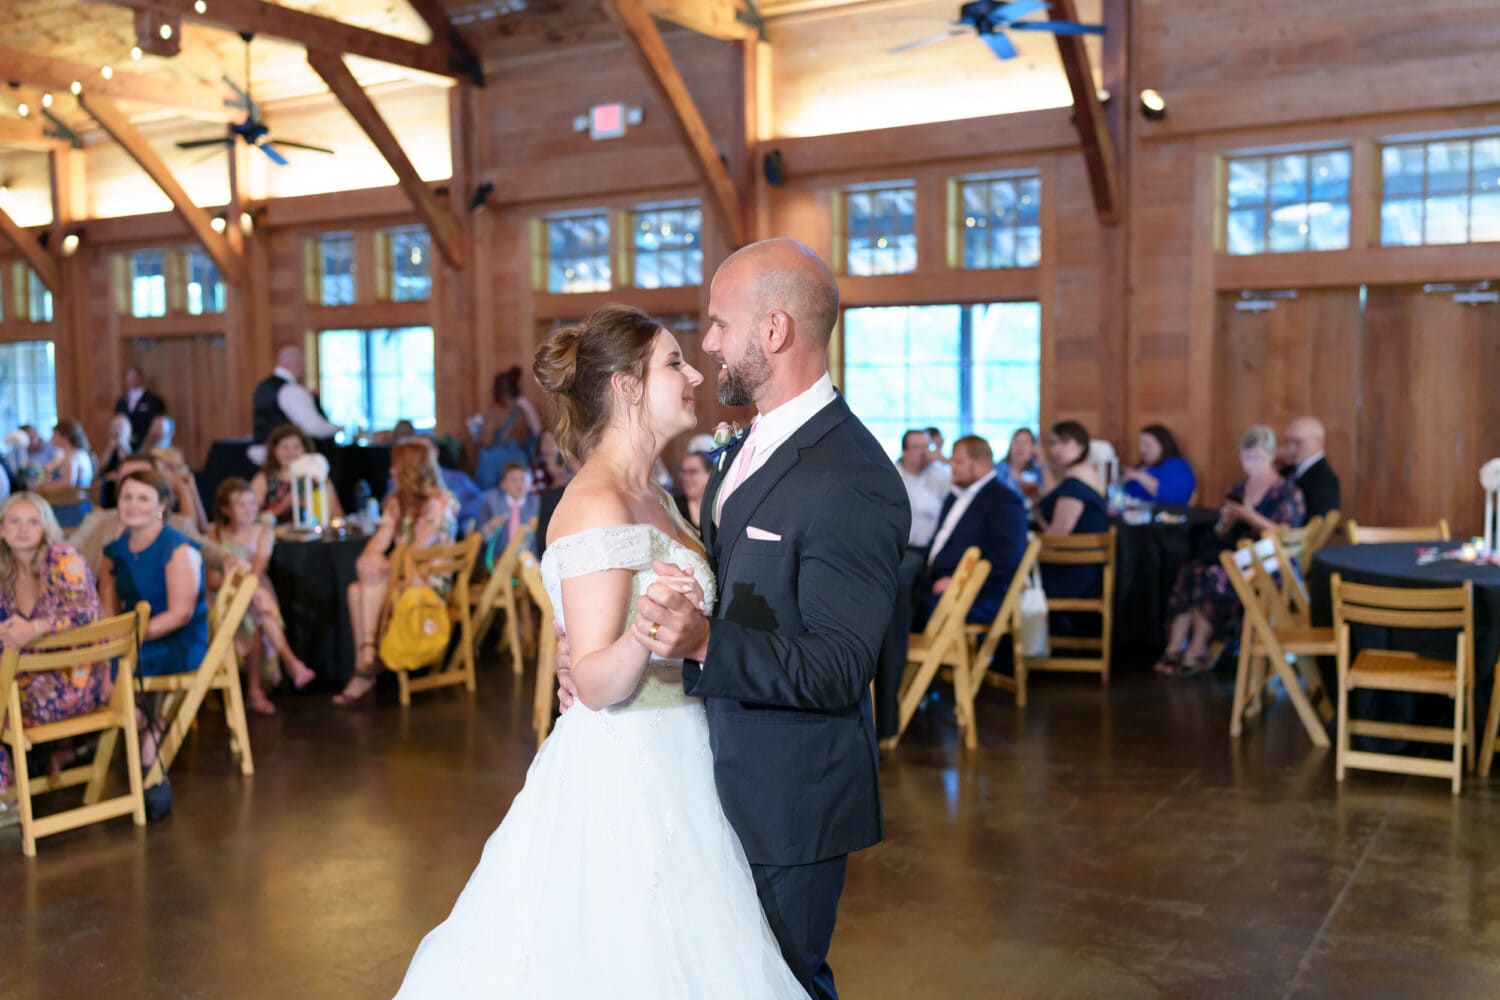 First dance with bride and groom - The Pavilion at Pepper Plantation